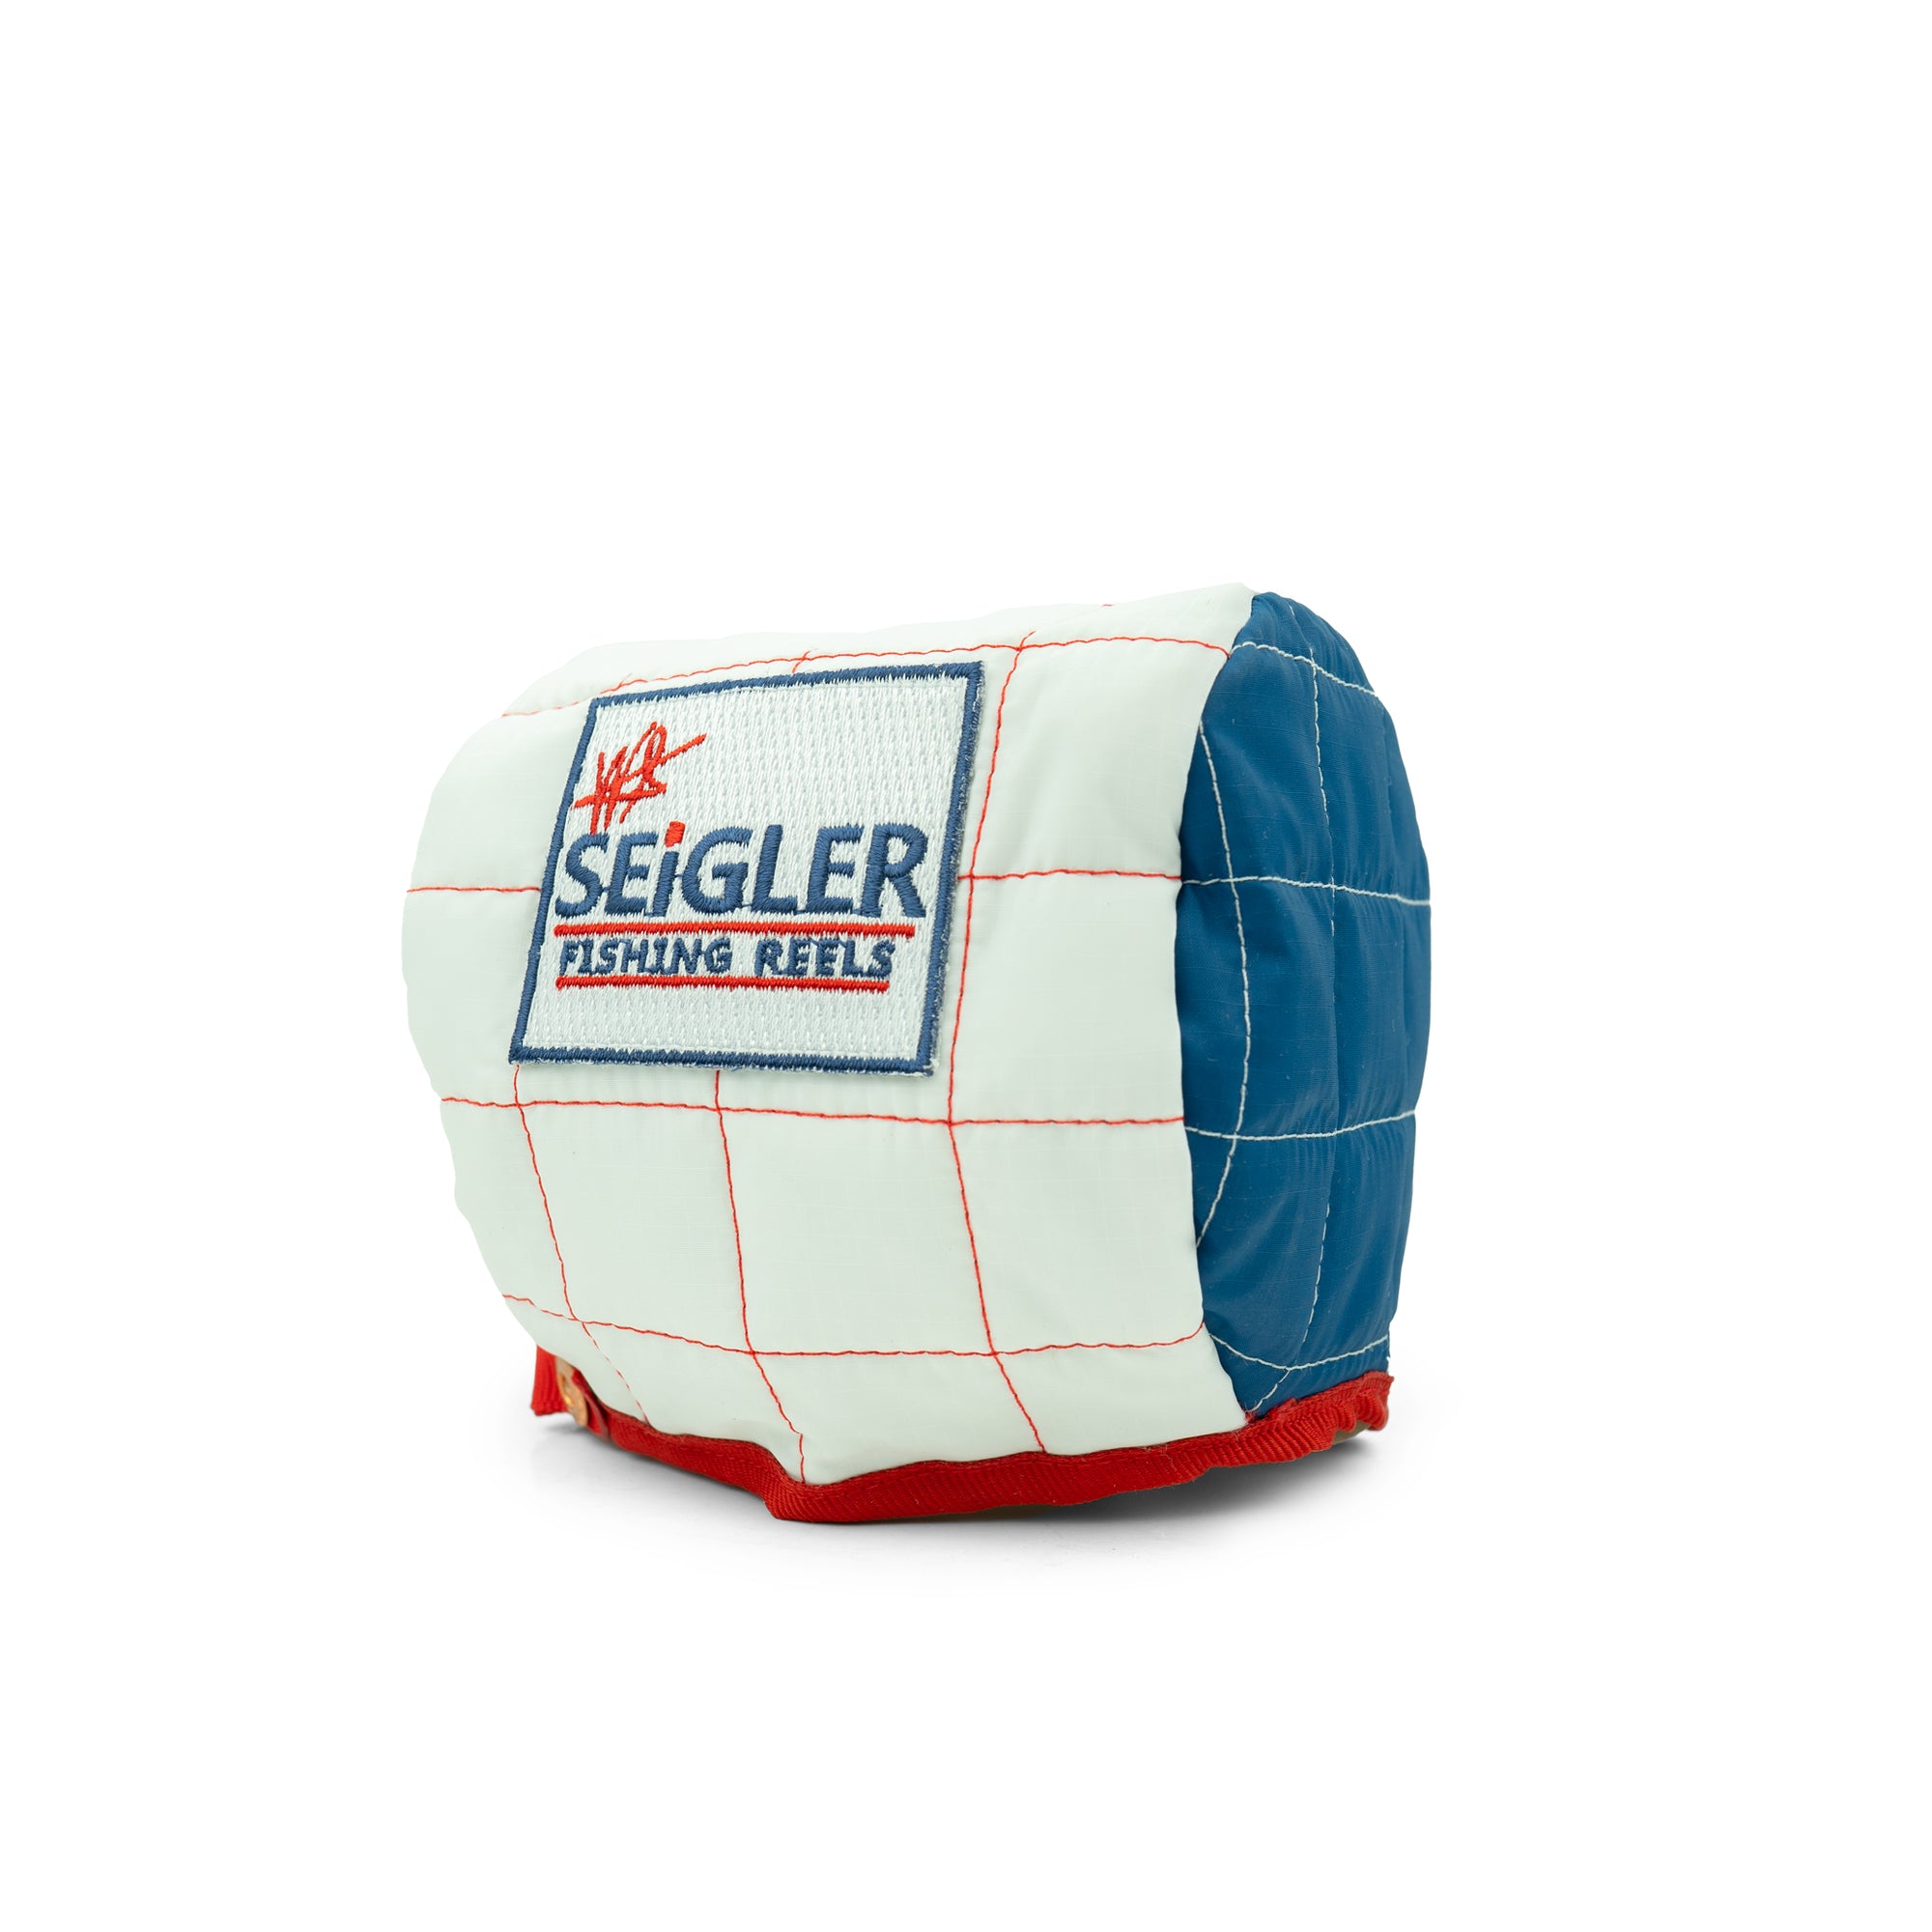 Conventional fishing reel cover by seigler fishing reels.